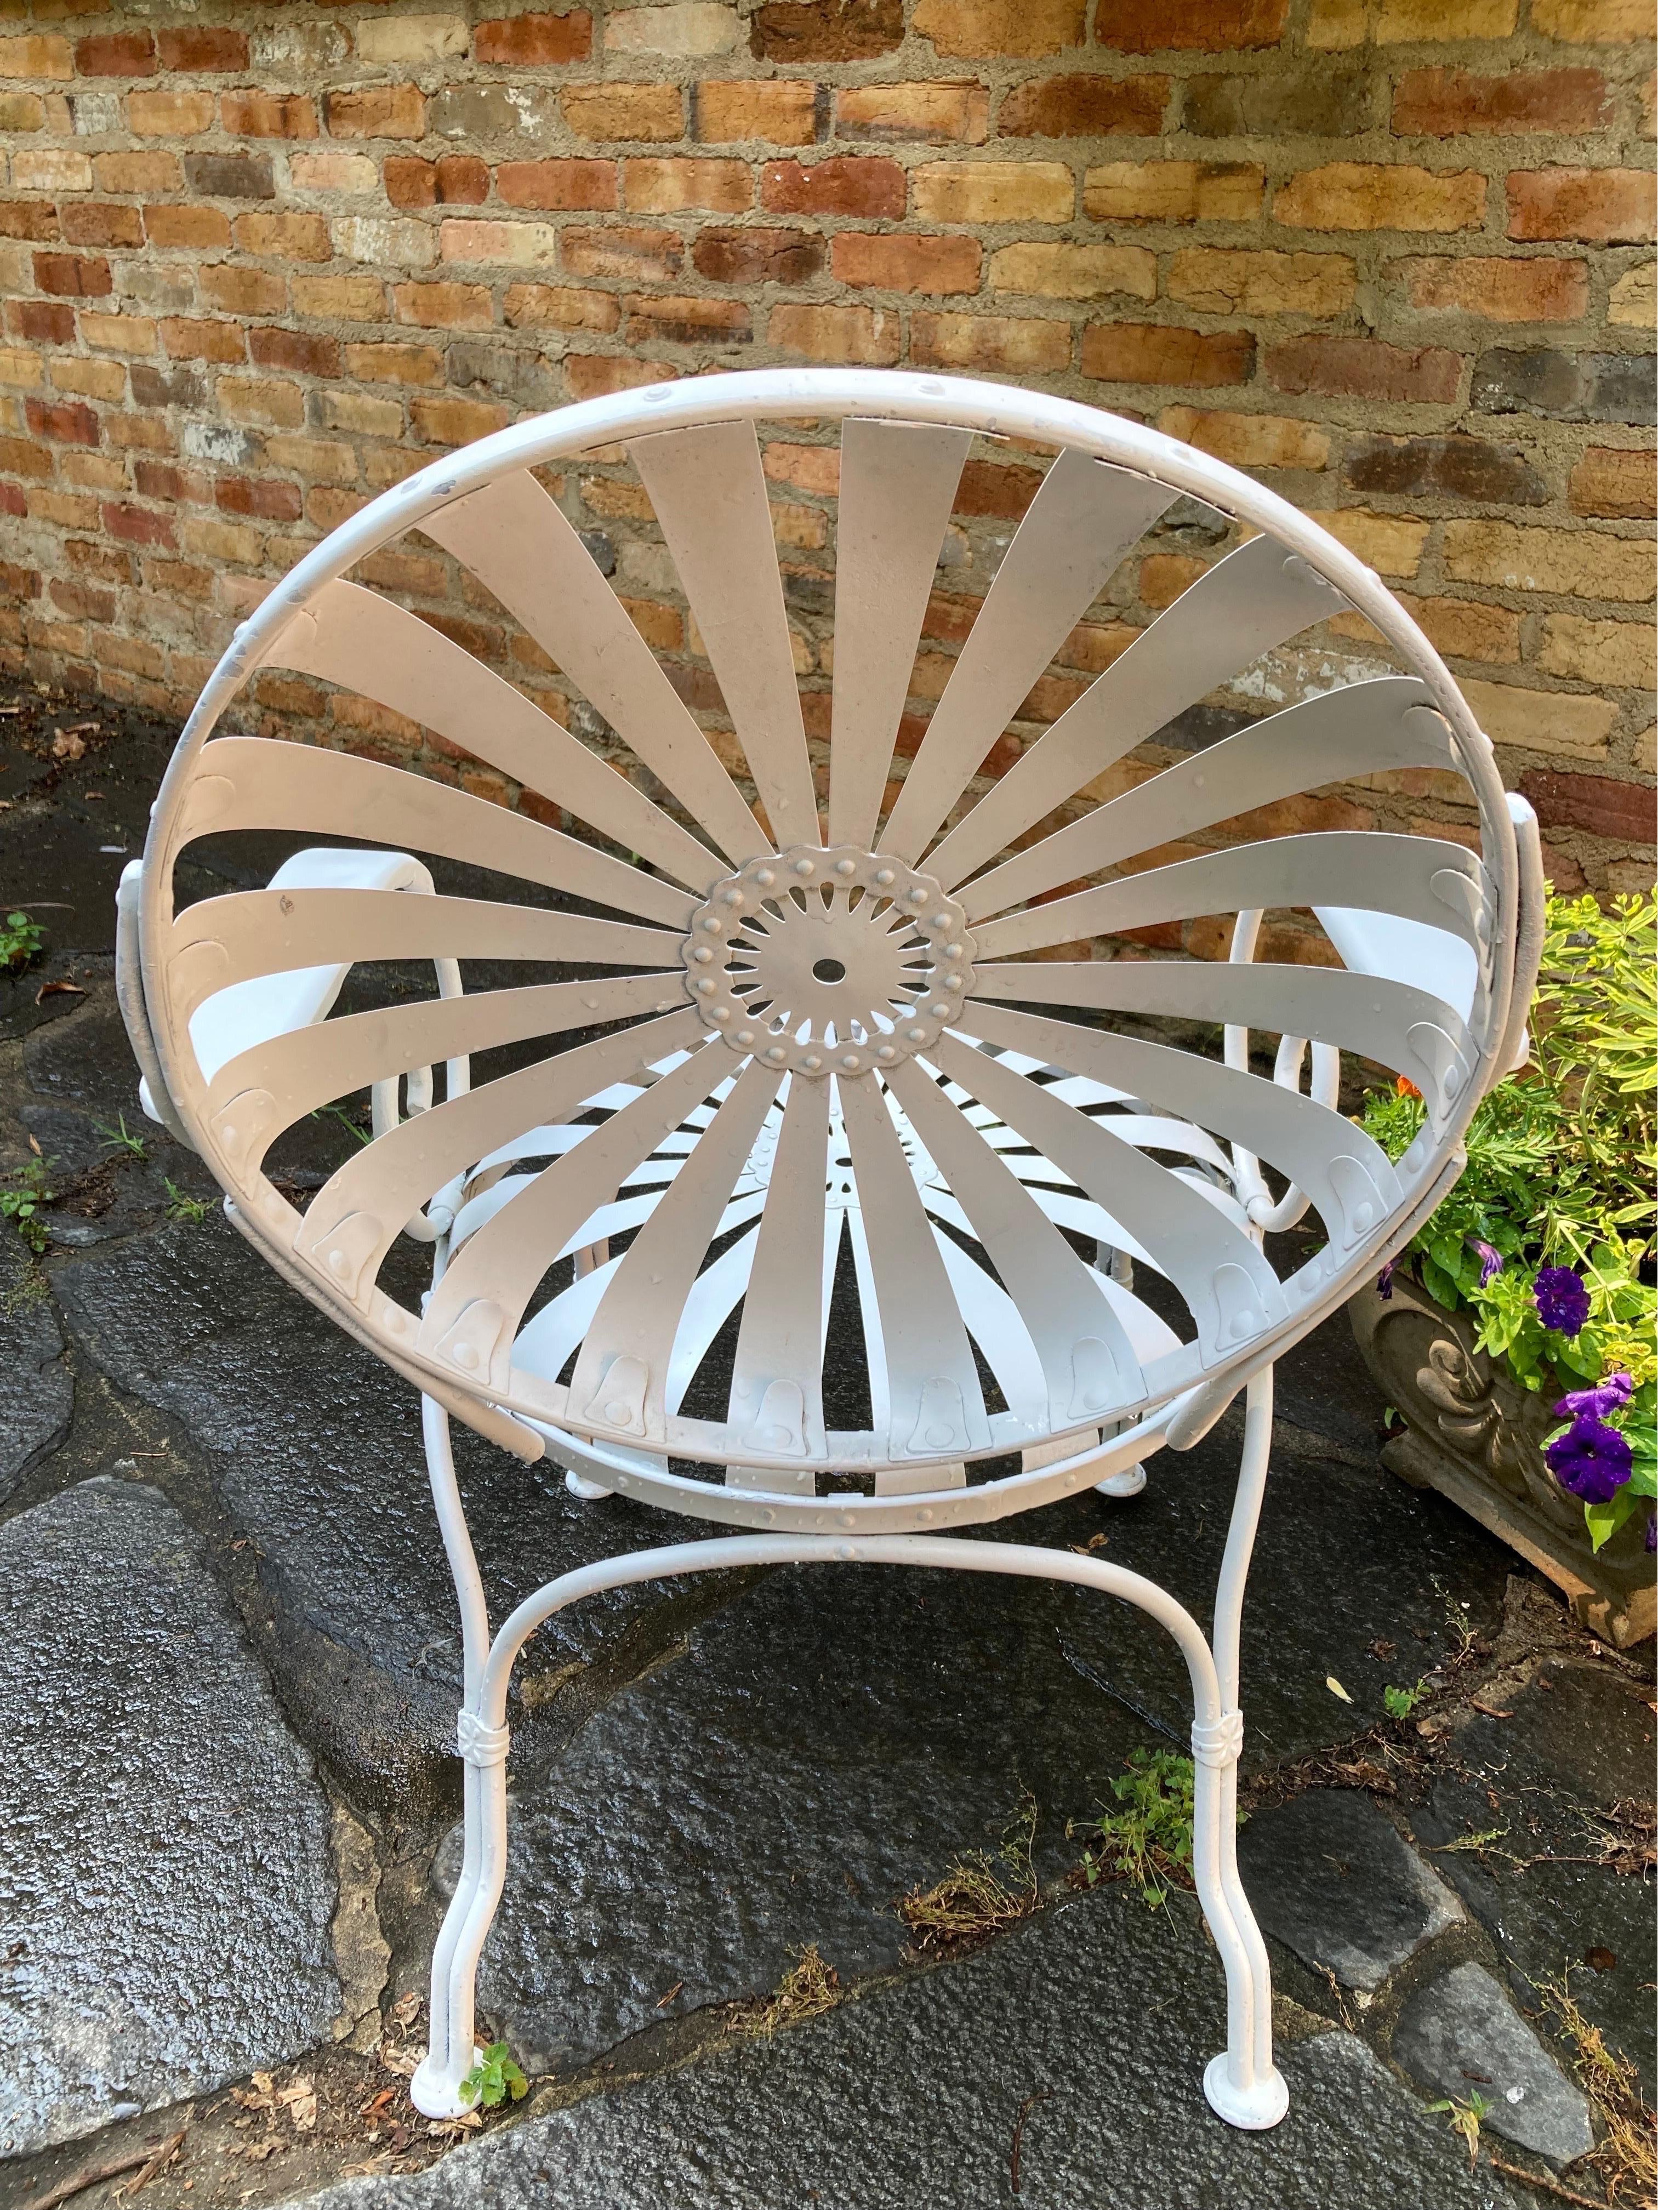 spring steel chair, pinwheel design

no maker’s mark

multiple sets available

seat to floor is 17
22.25”W × 24ʺD 

perfect addition to any home or garden area,,,,
classic elegance in every setting